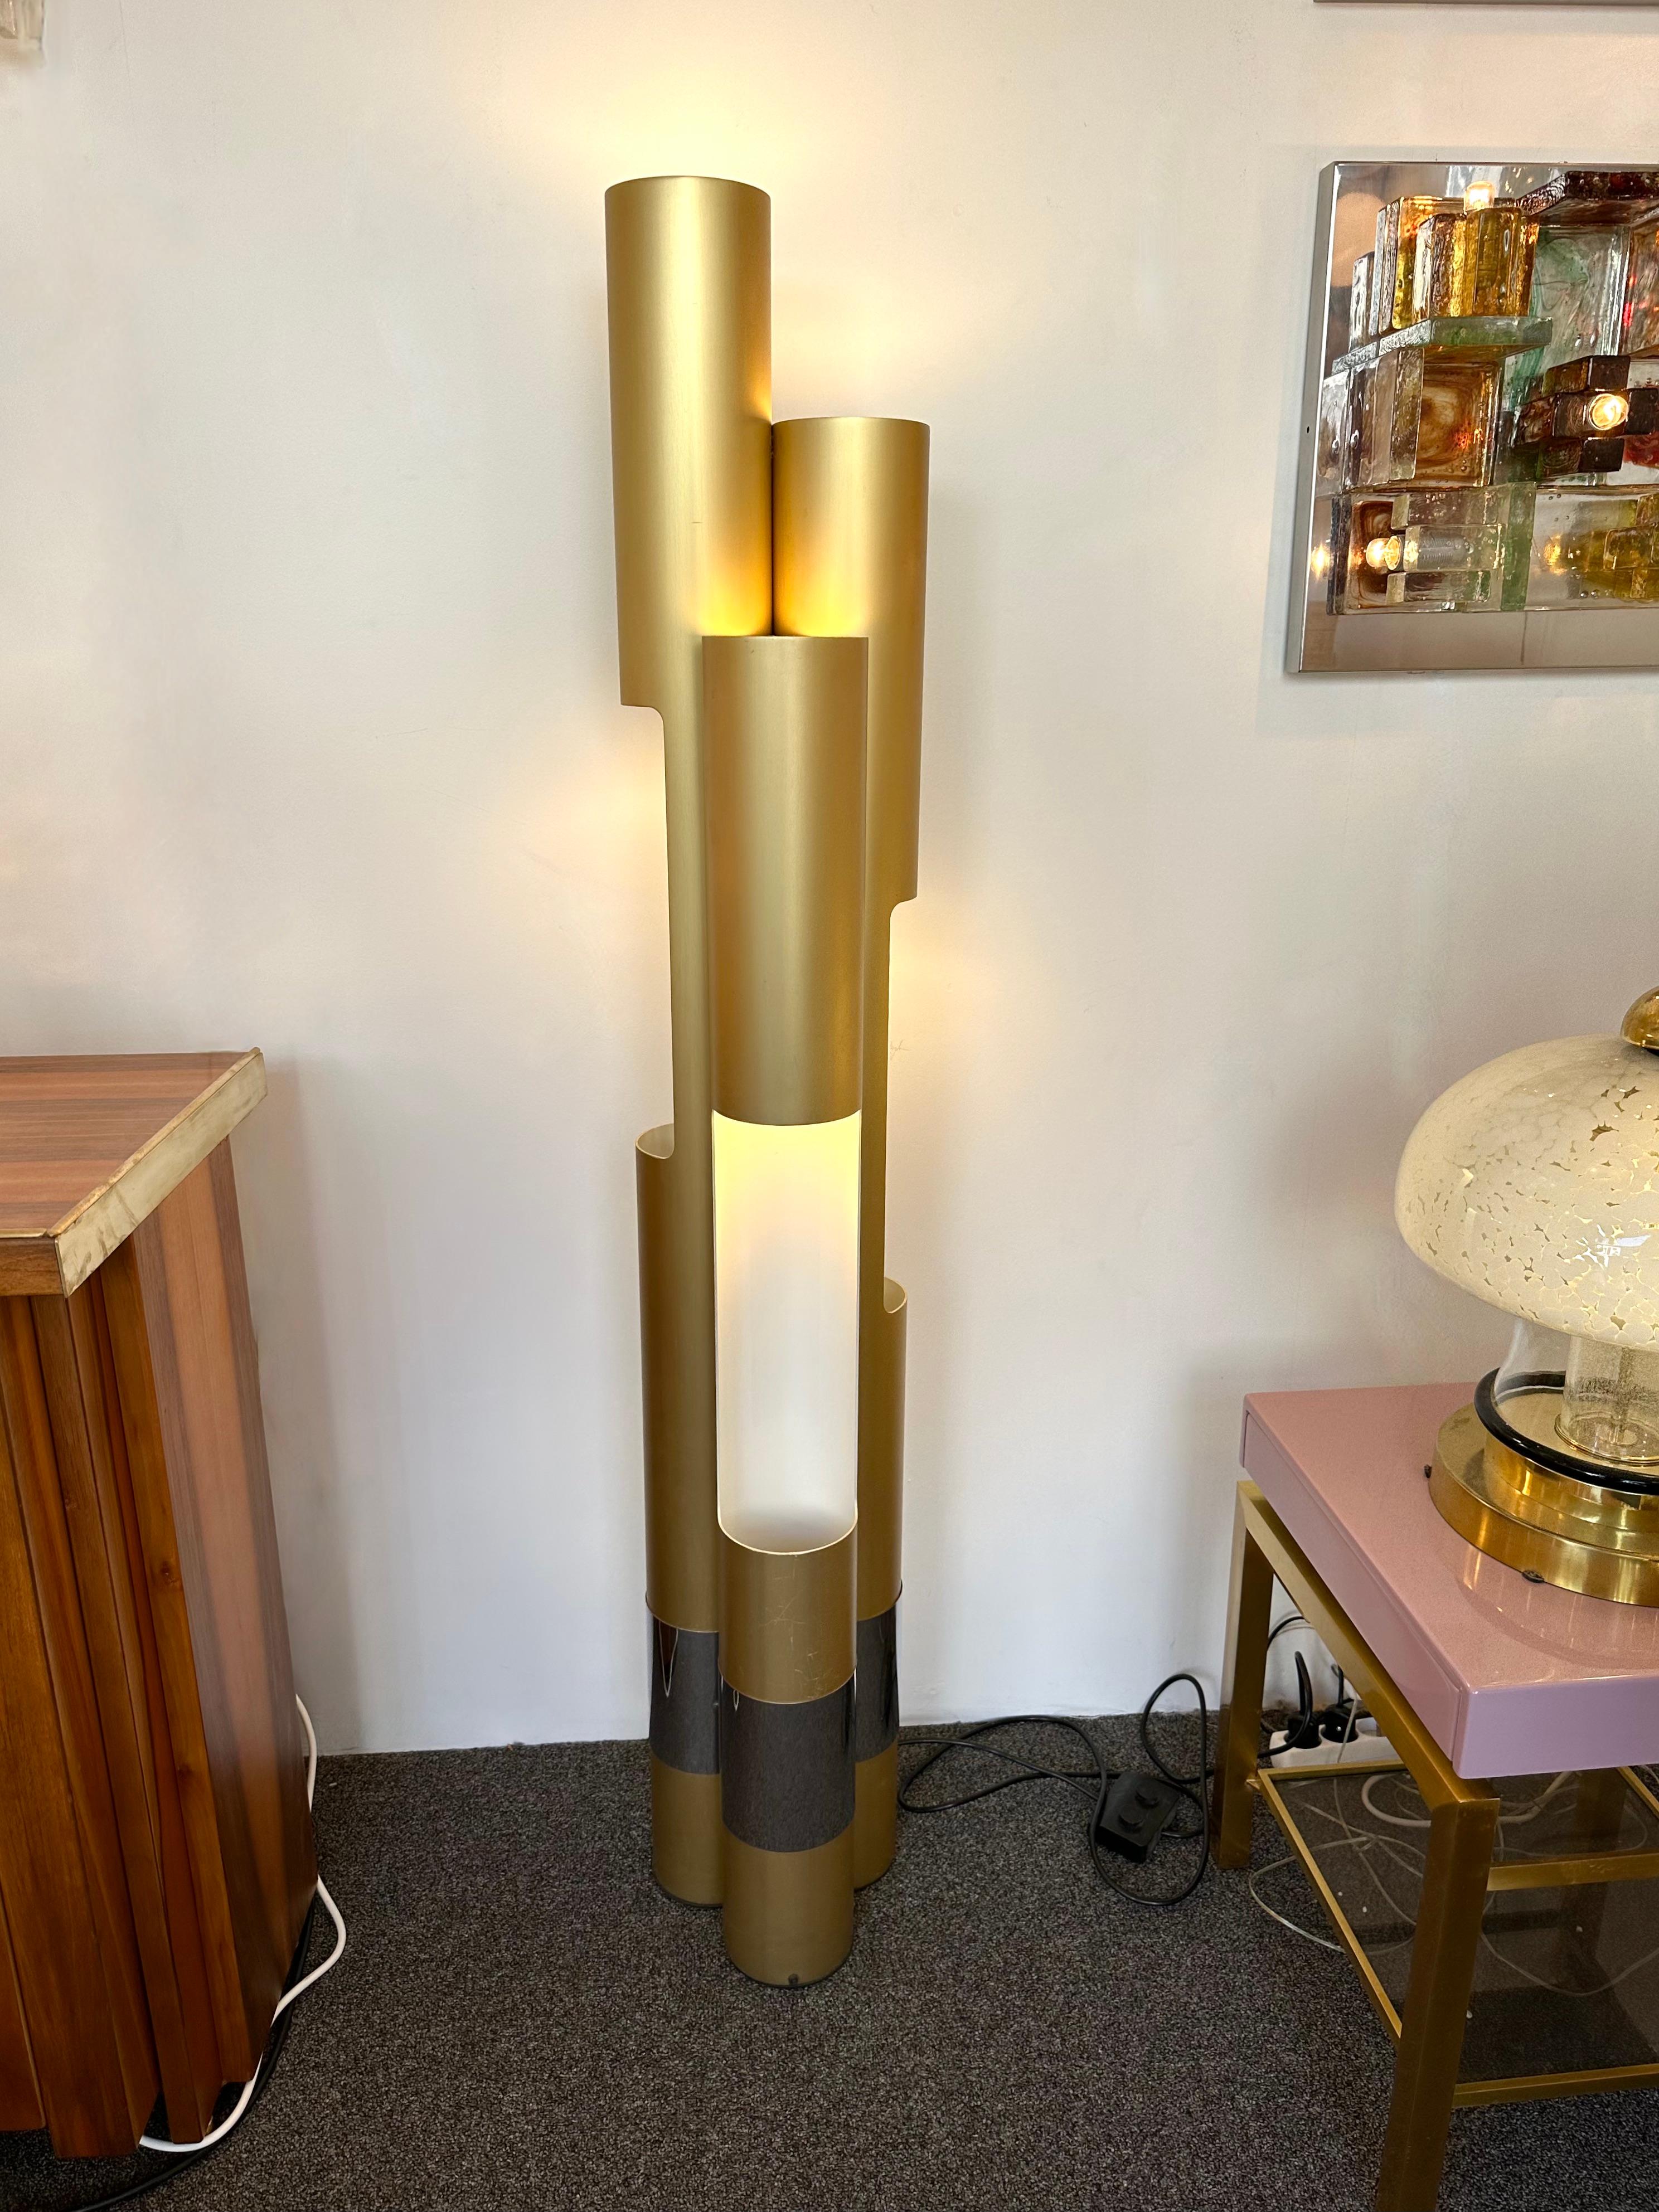 Mid-Century Modern Space Age Organ floor lamp design by the manufacture Luci. Rare version in Gold gilt metal style satinated brass, interior white lacquered and silver metal chrome details. Famous editor manufacture like Venini, Vistosi, La